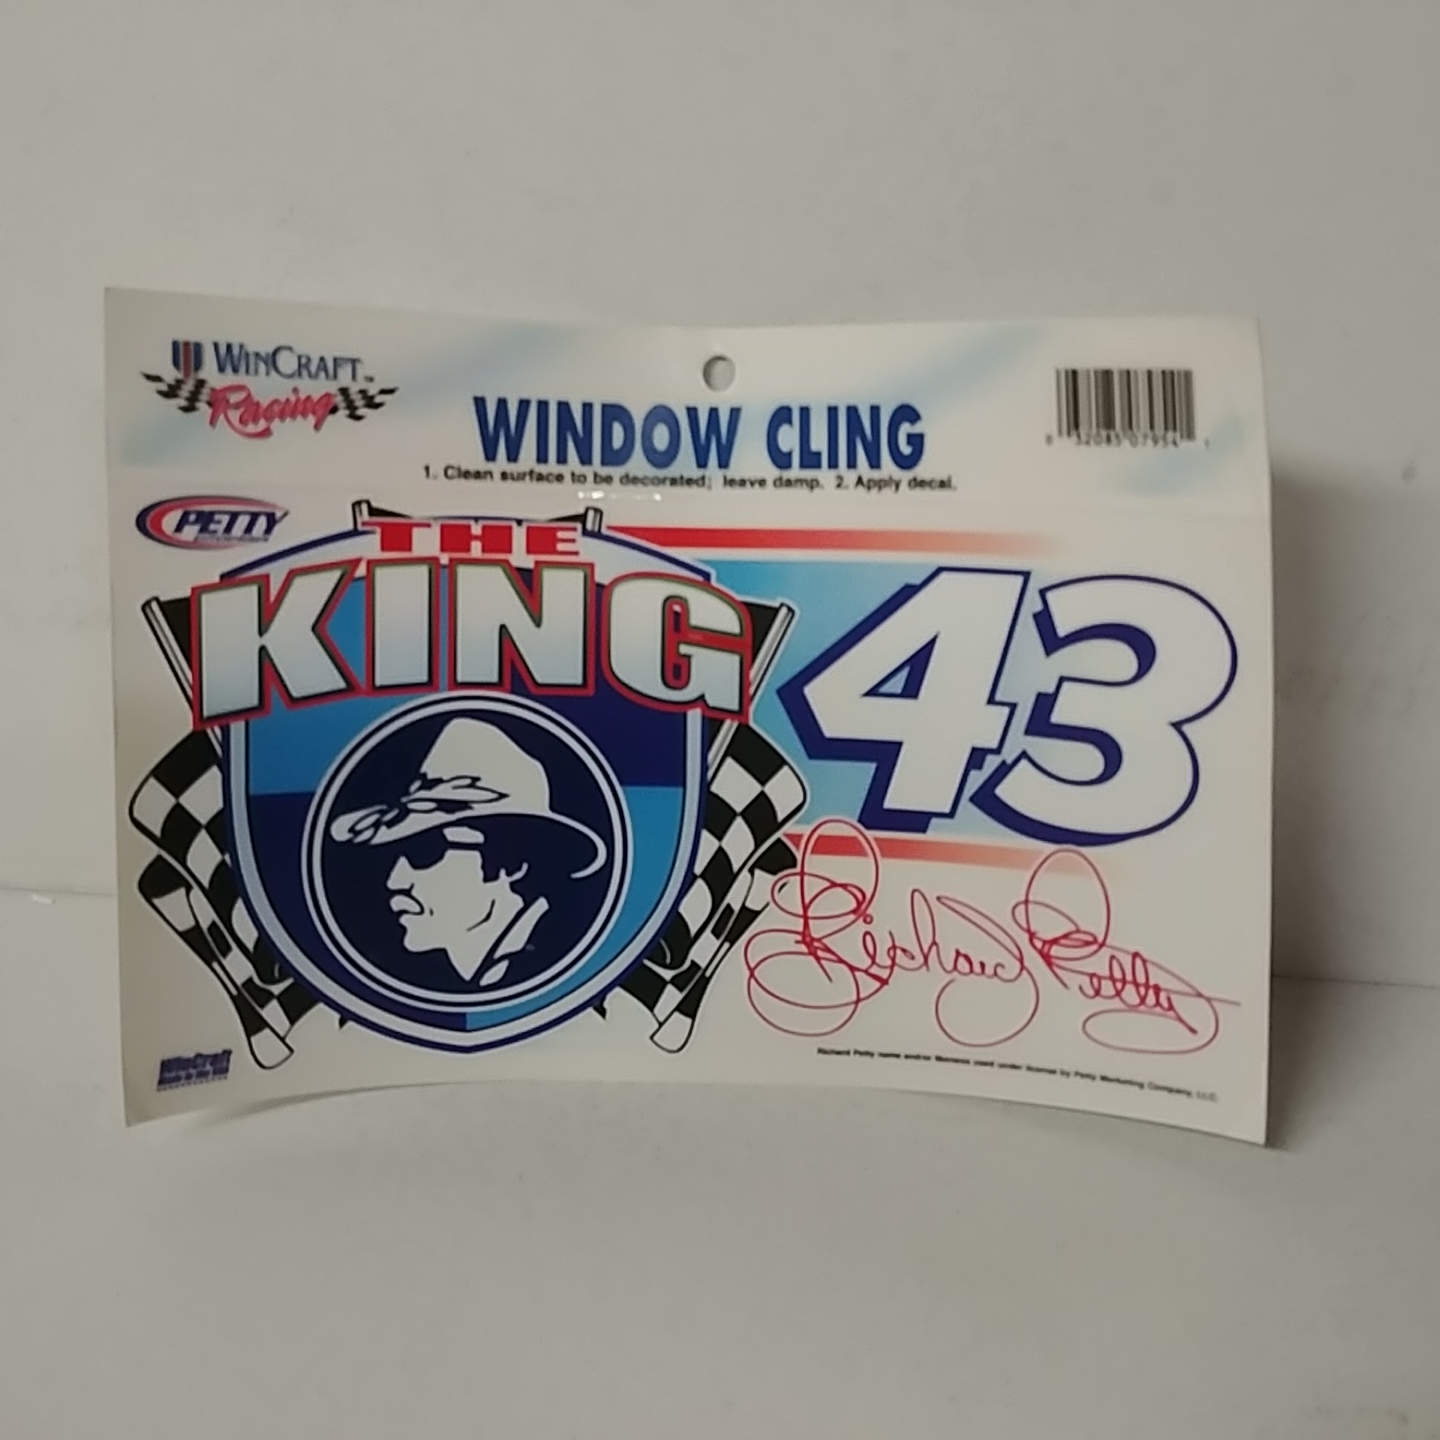 2003 Richard Petty "The King" static decal